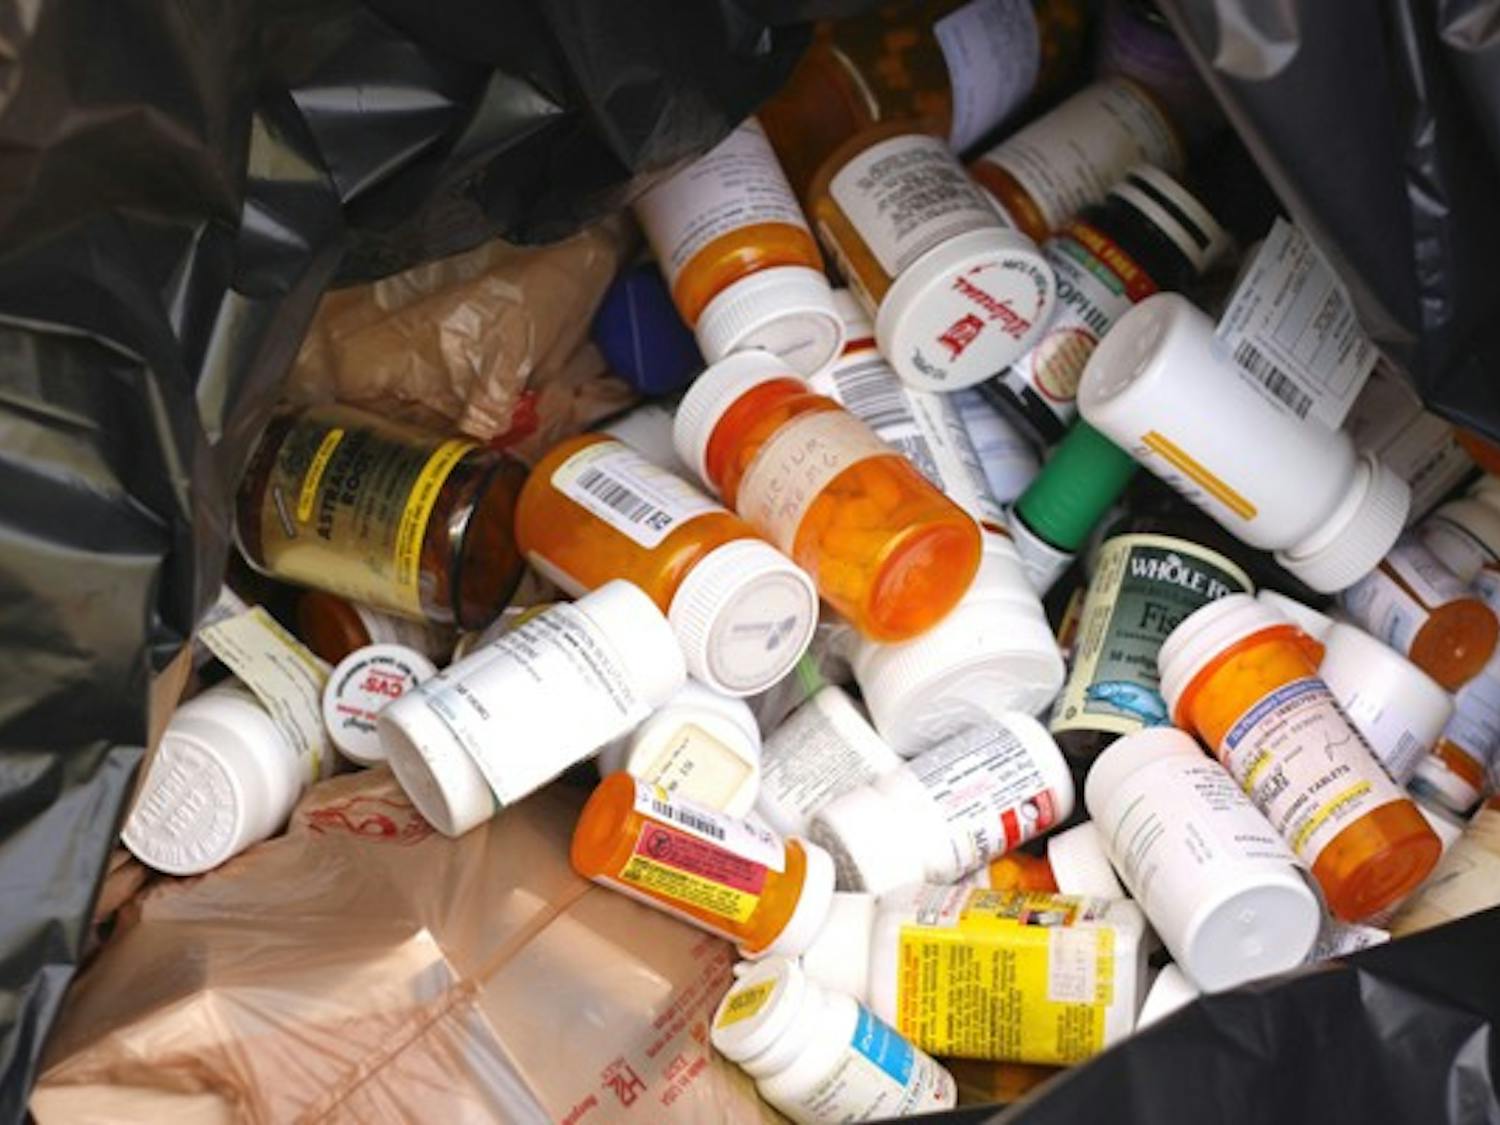 GIVING BACK: ASU's wellness department and police department were at Tuesday's Farmer's Market on the Tempe campus to collect and dispose of old medication safely. (Photo by Lillian Reid)